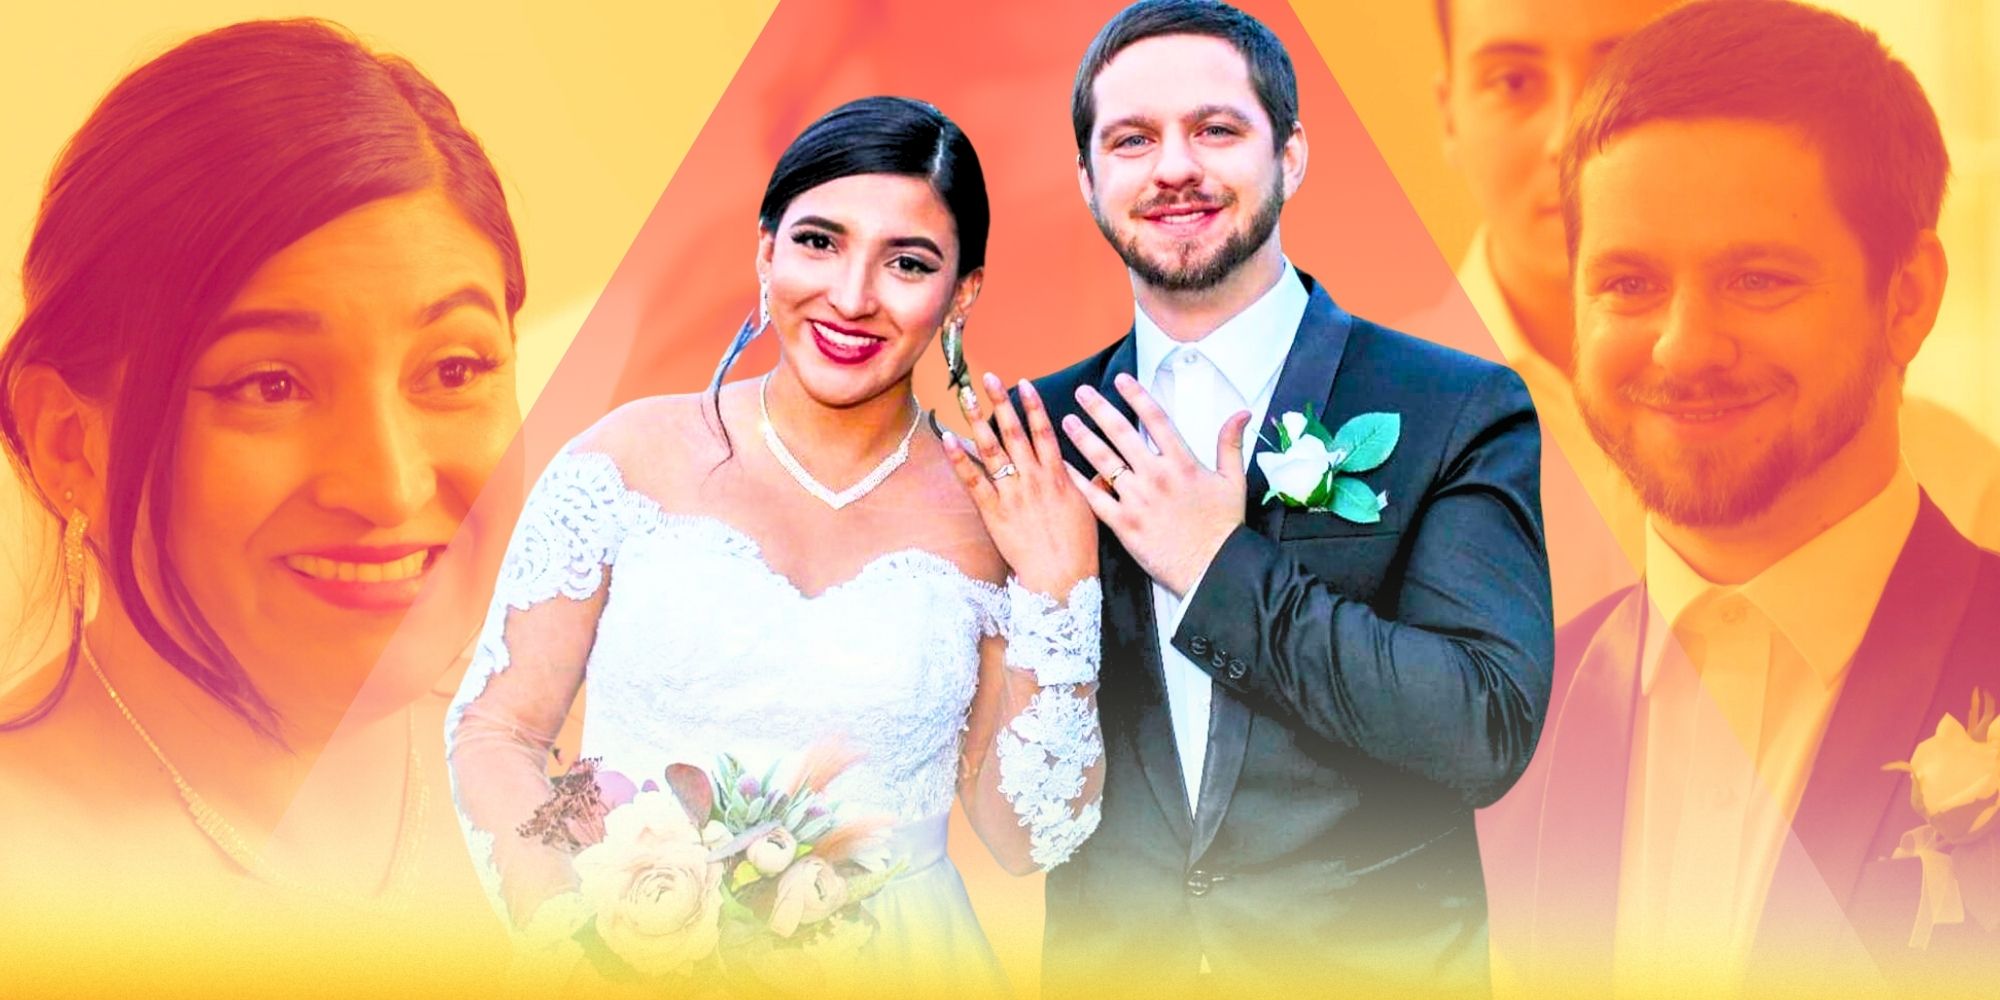 Montage of 90 Day Fiancé's Clayton & Anali in their wedding outfits and showing off rings